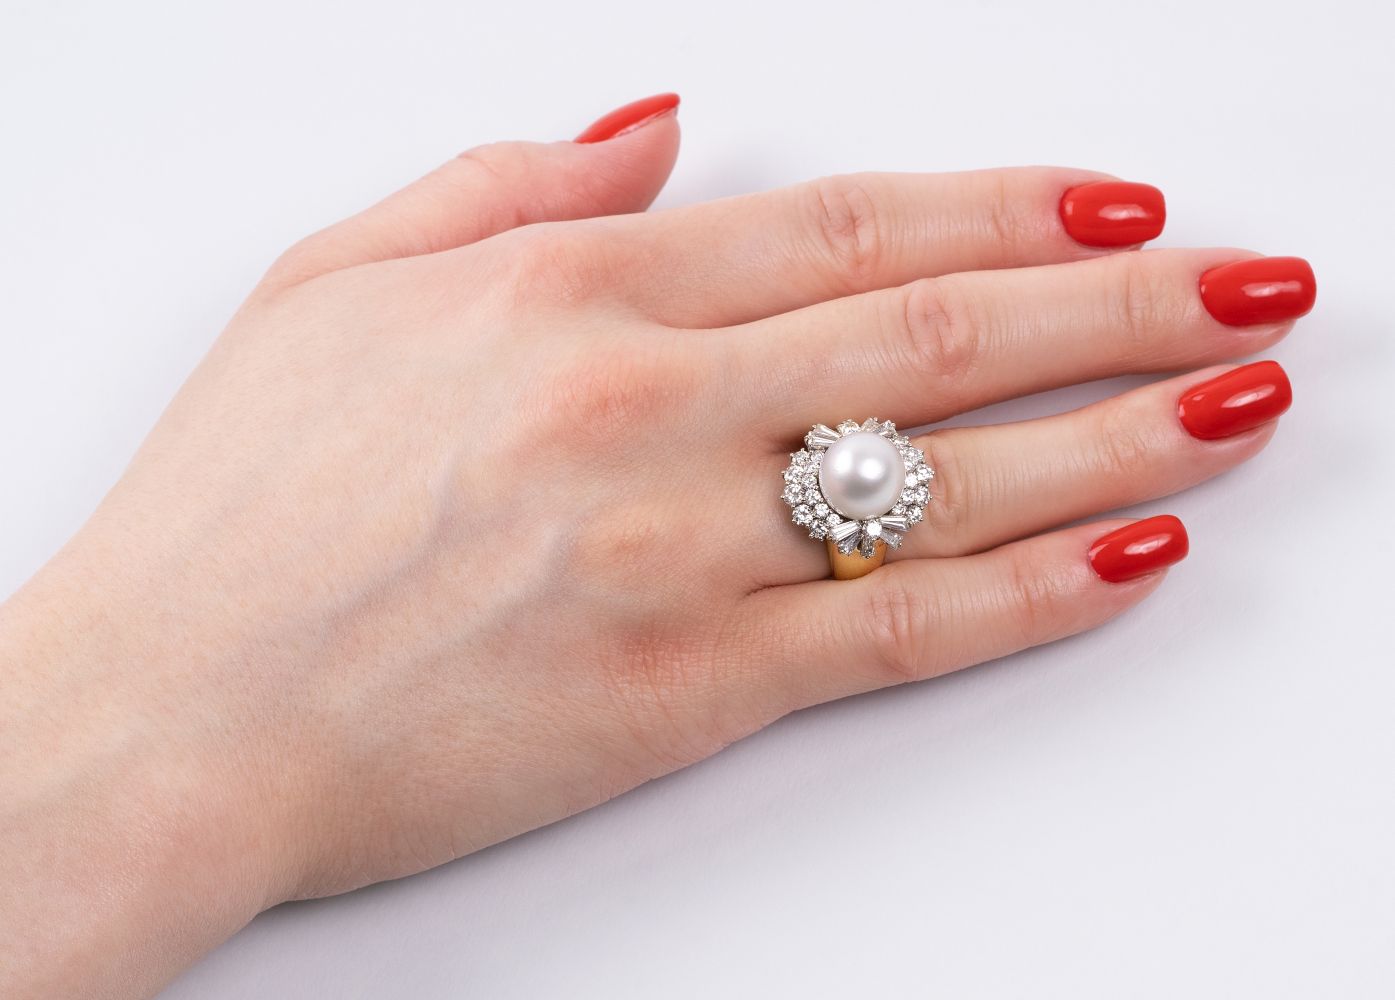 A Southsea Pearl Ring with Diamonds - image 2